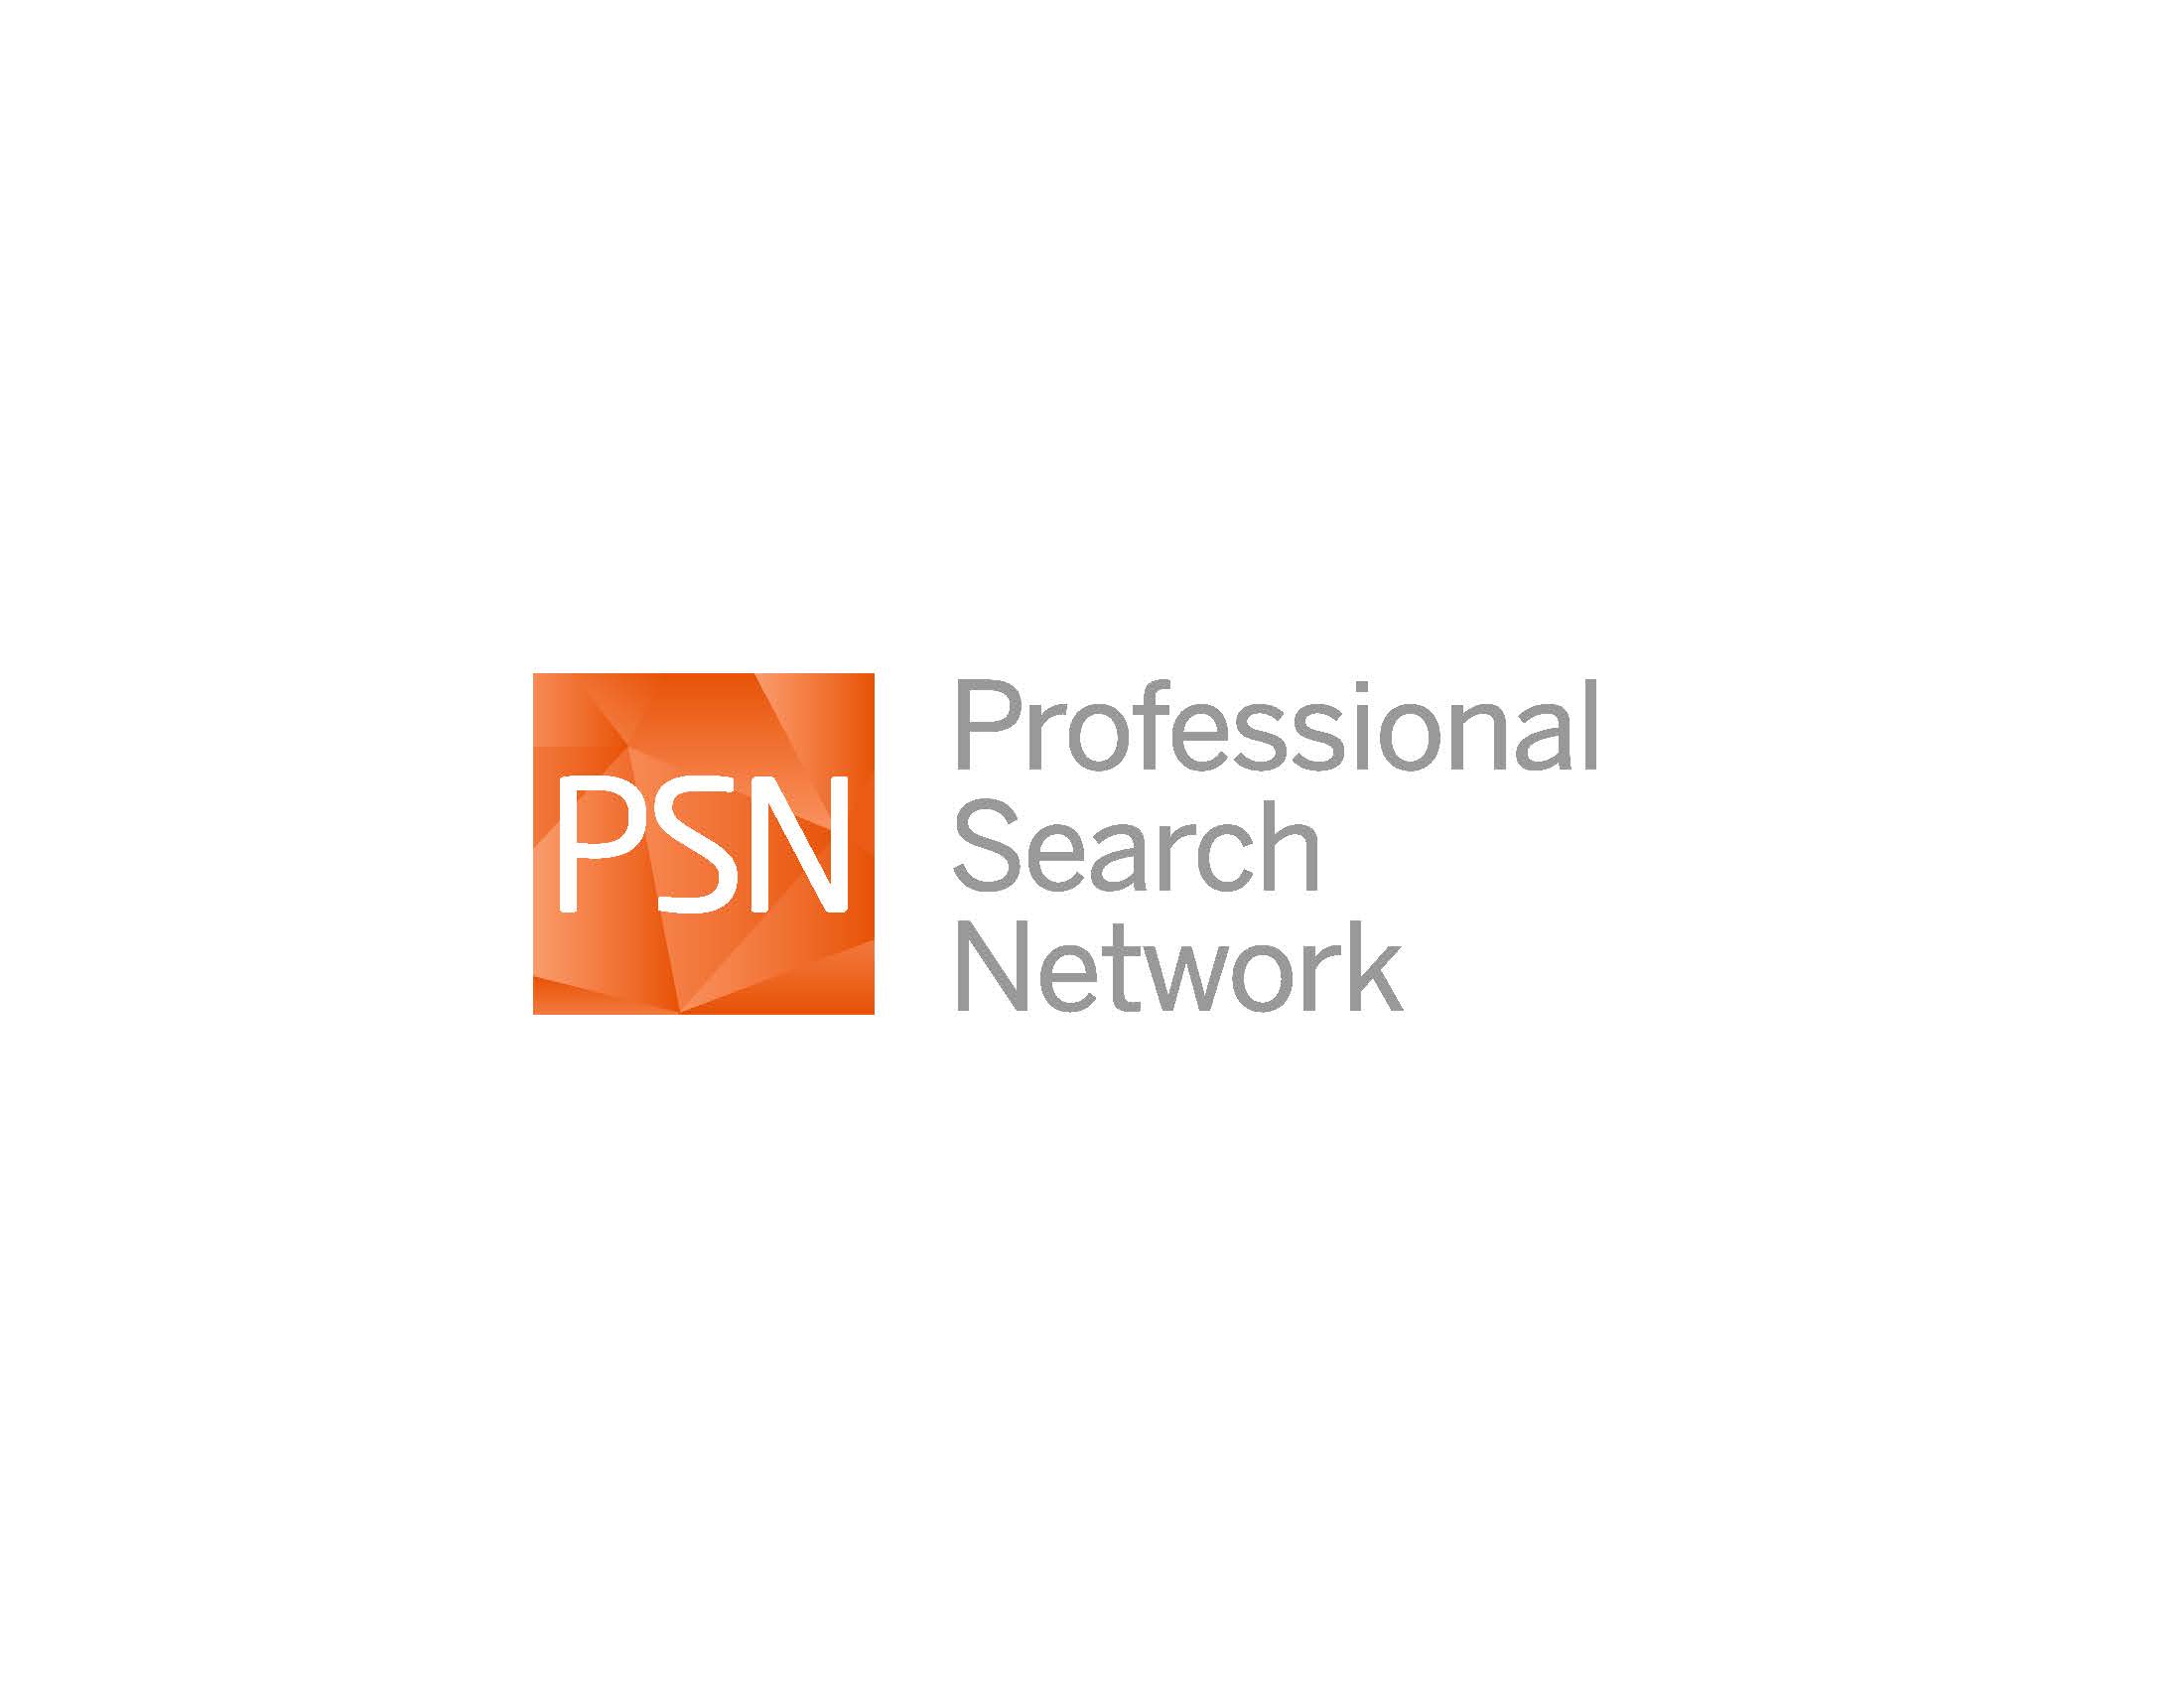 Professional Search Network